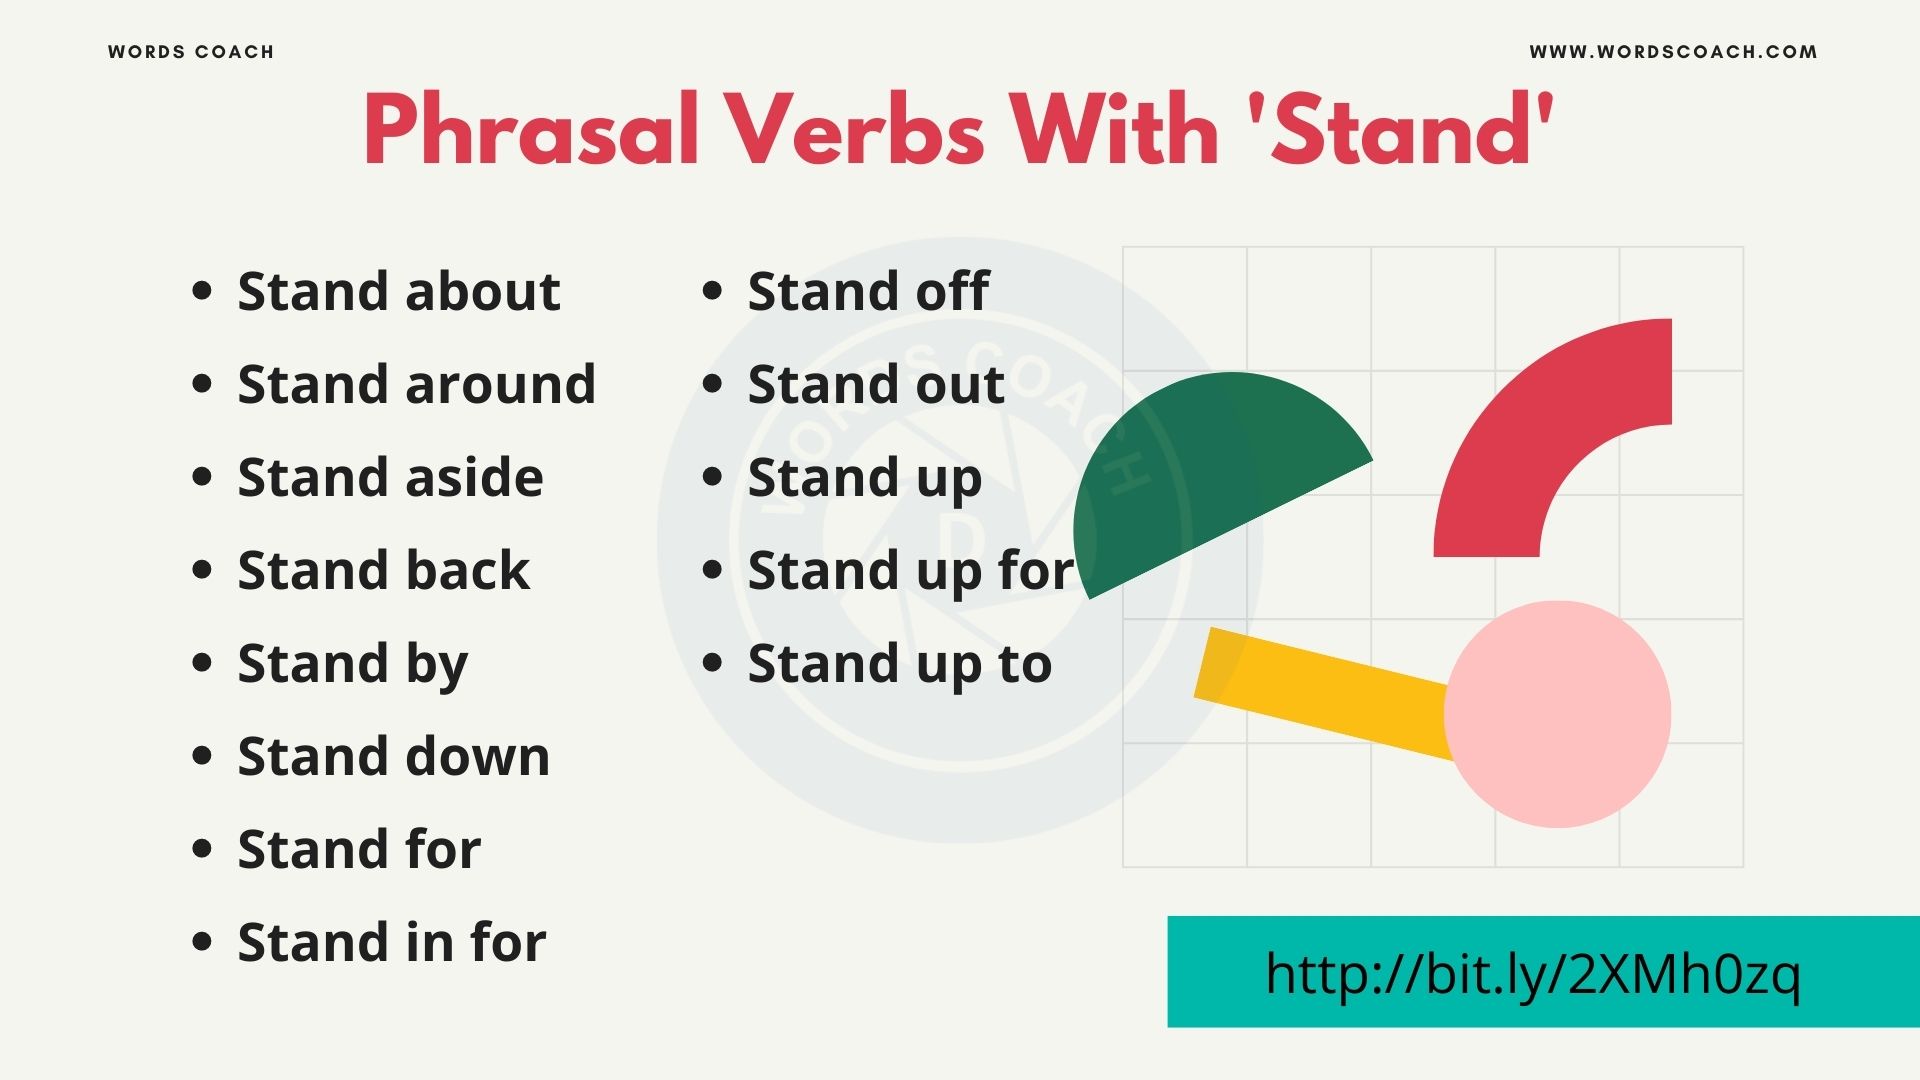 Phrasal Verbs With 'Stand' - wordscoach.com